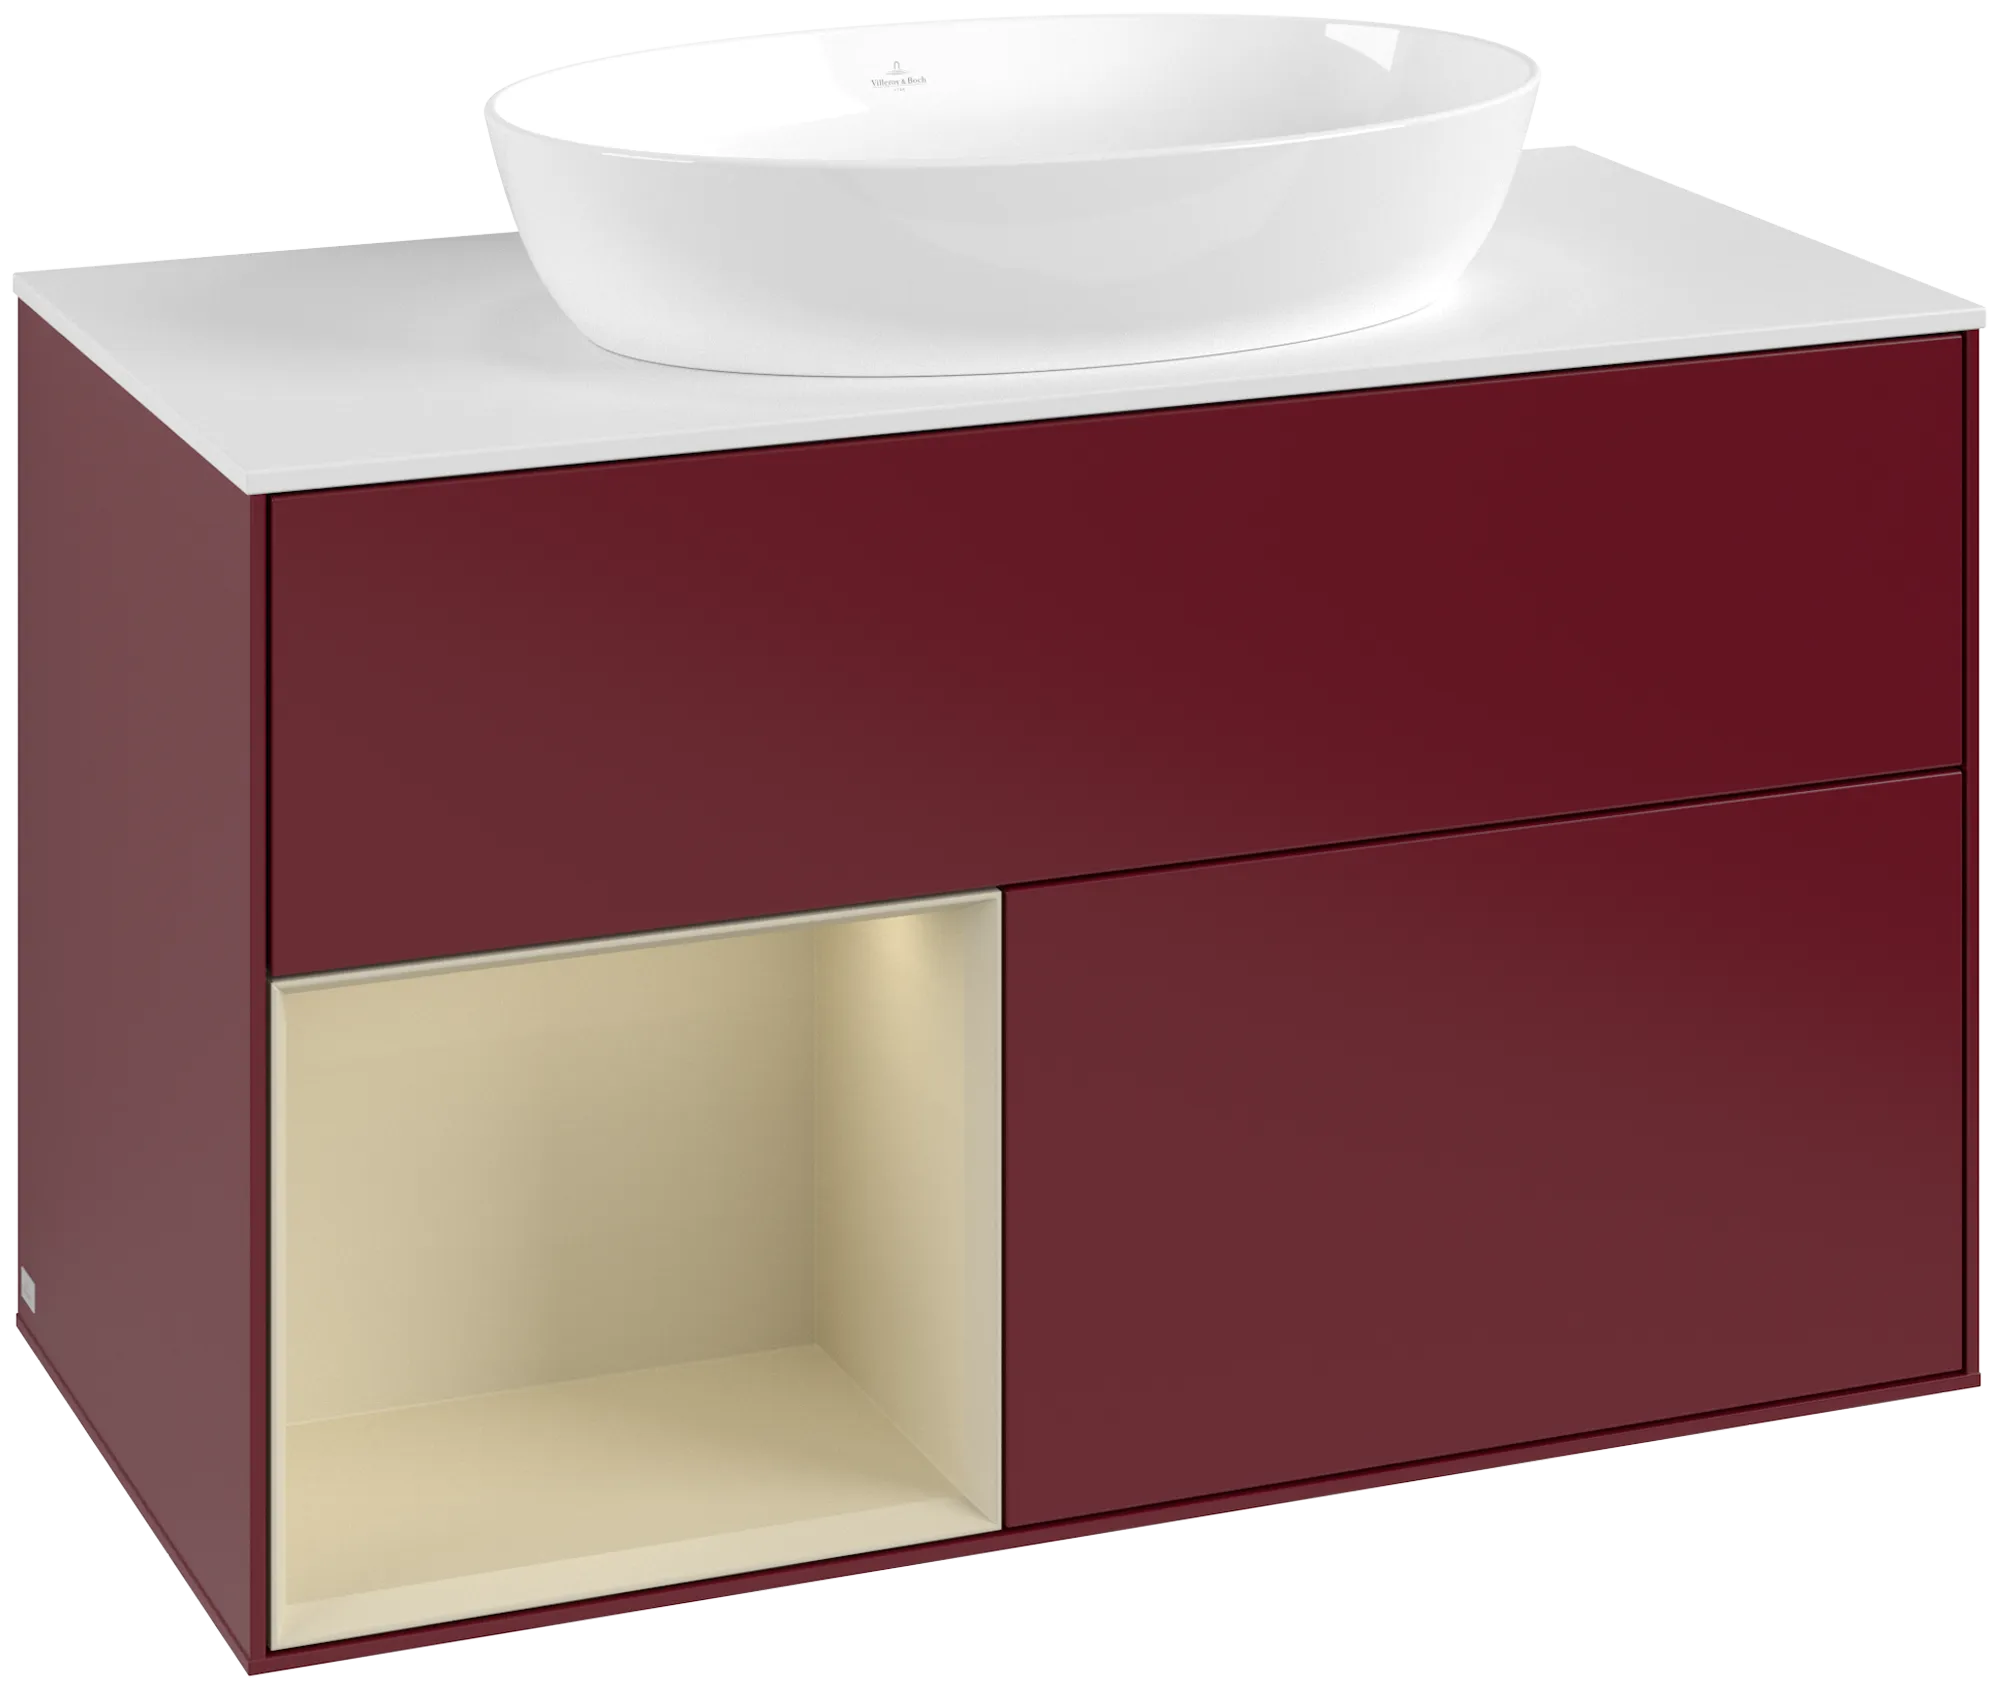 Picture of VILLEROY BOCH Finion Vanity unit, with lighting, 2 pull-out compartments, 1000 x 603 x 501 mm, Peony Matt Lacquer / Silk Grey Matt Lacquer / Glass White Matt #GA11HJHB